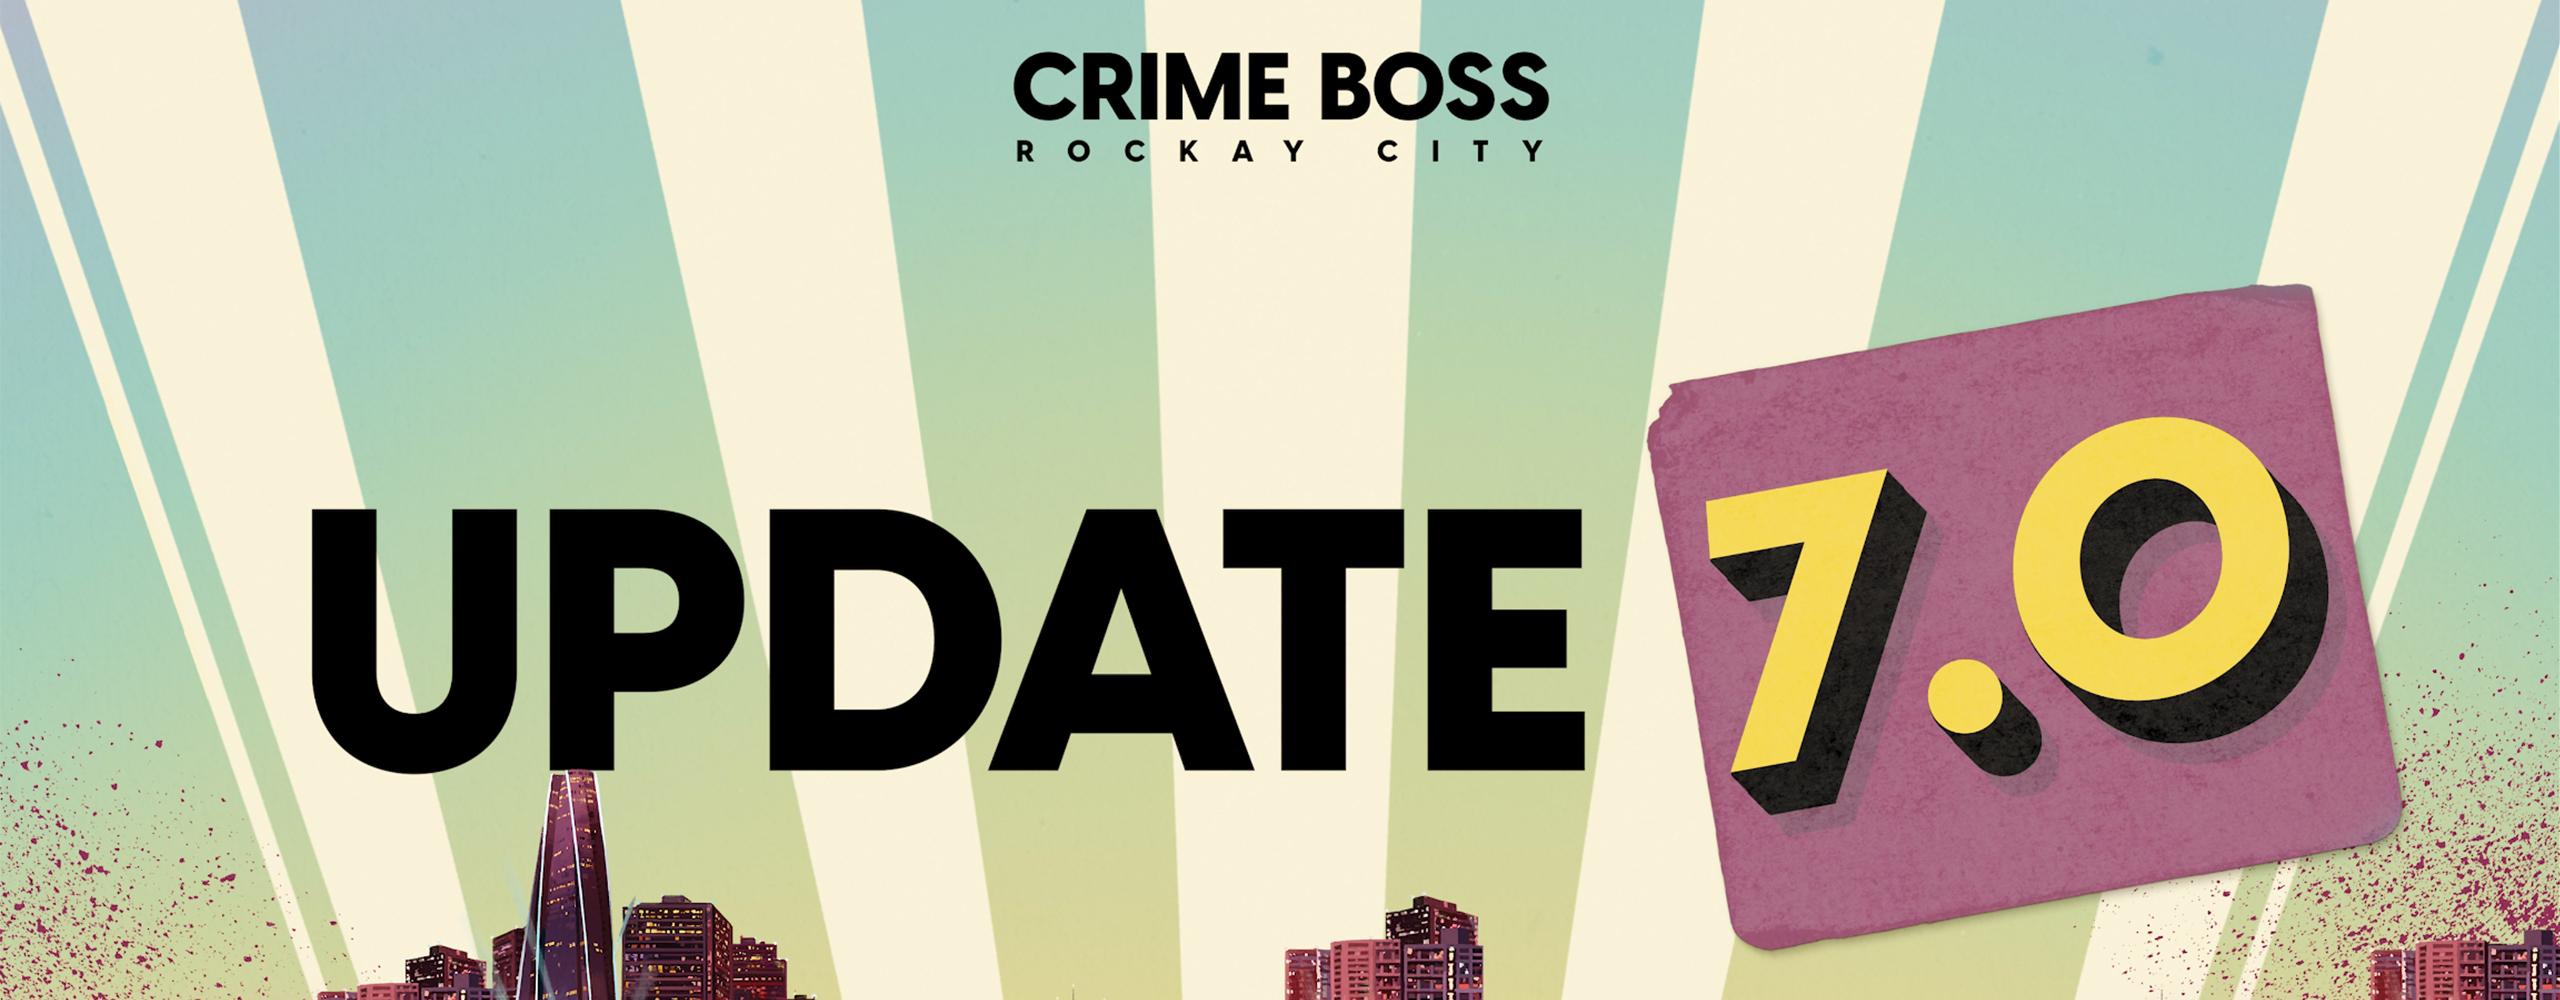 Update 7.0 is HERE! – Crime Boss Update 7.0 OUT NOW on Epic, Xbox Series X|S & PlayStation 5